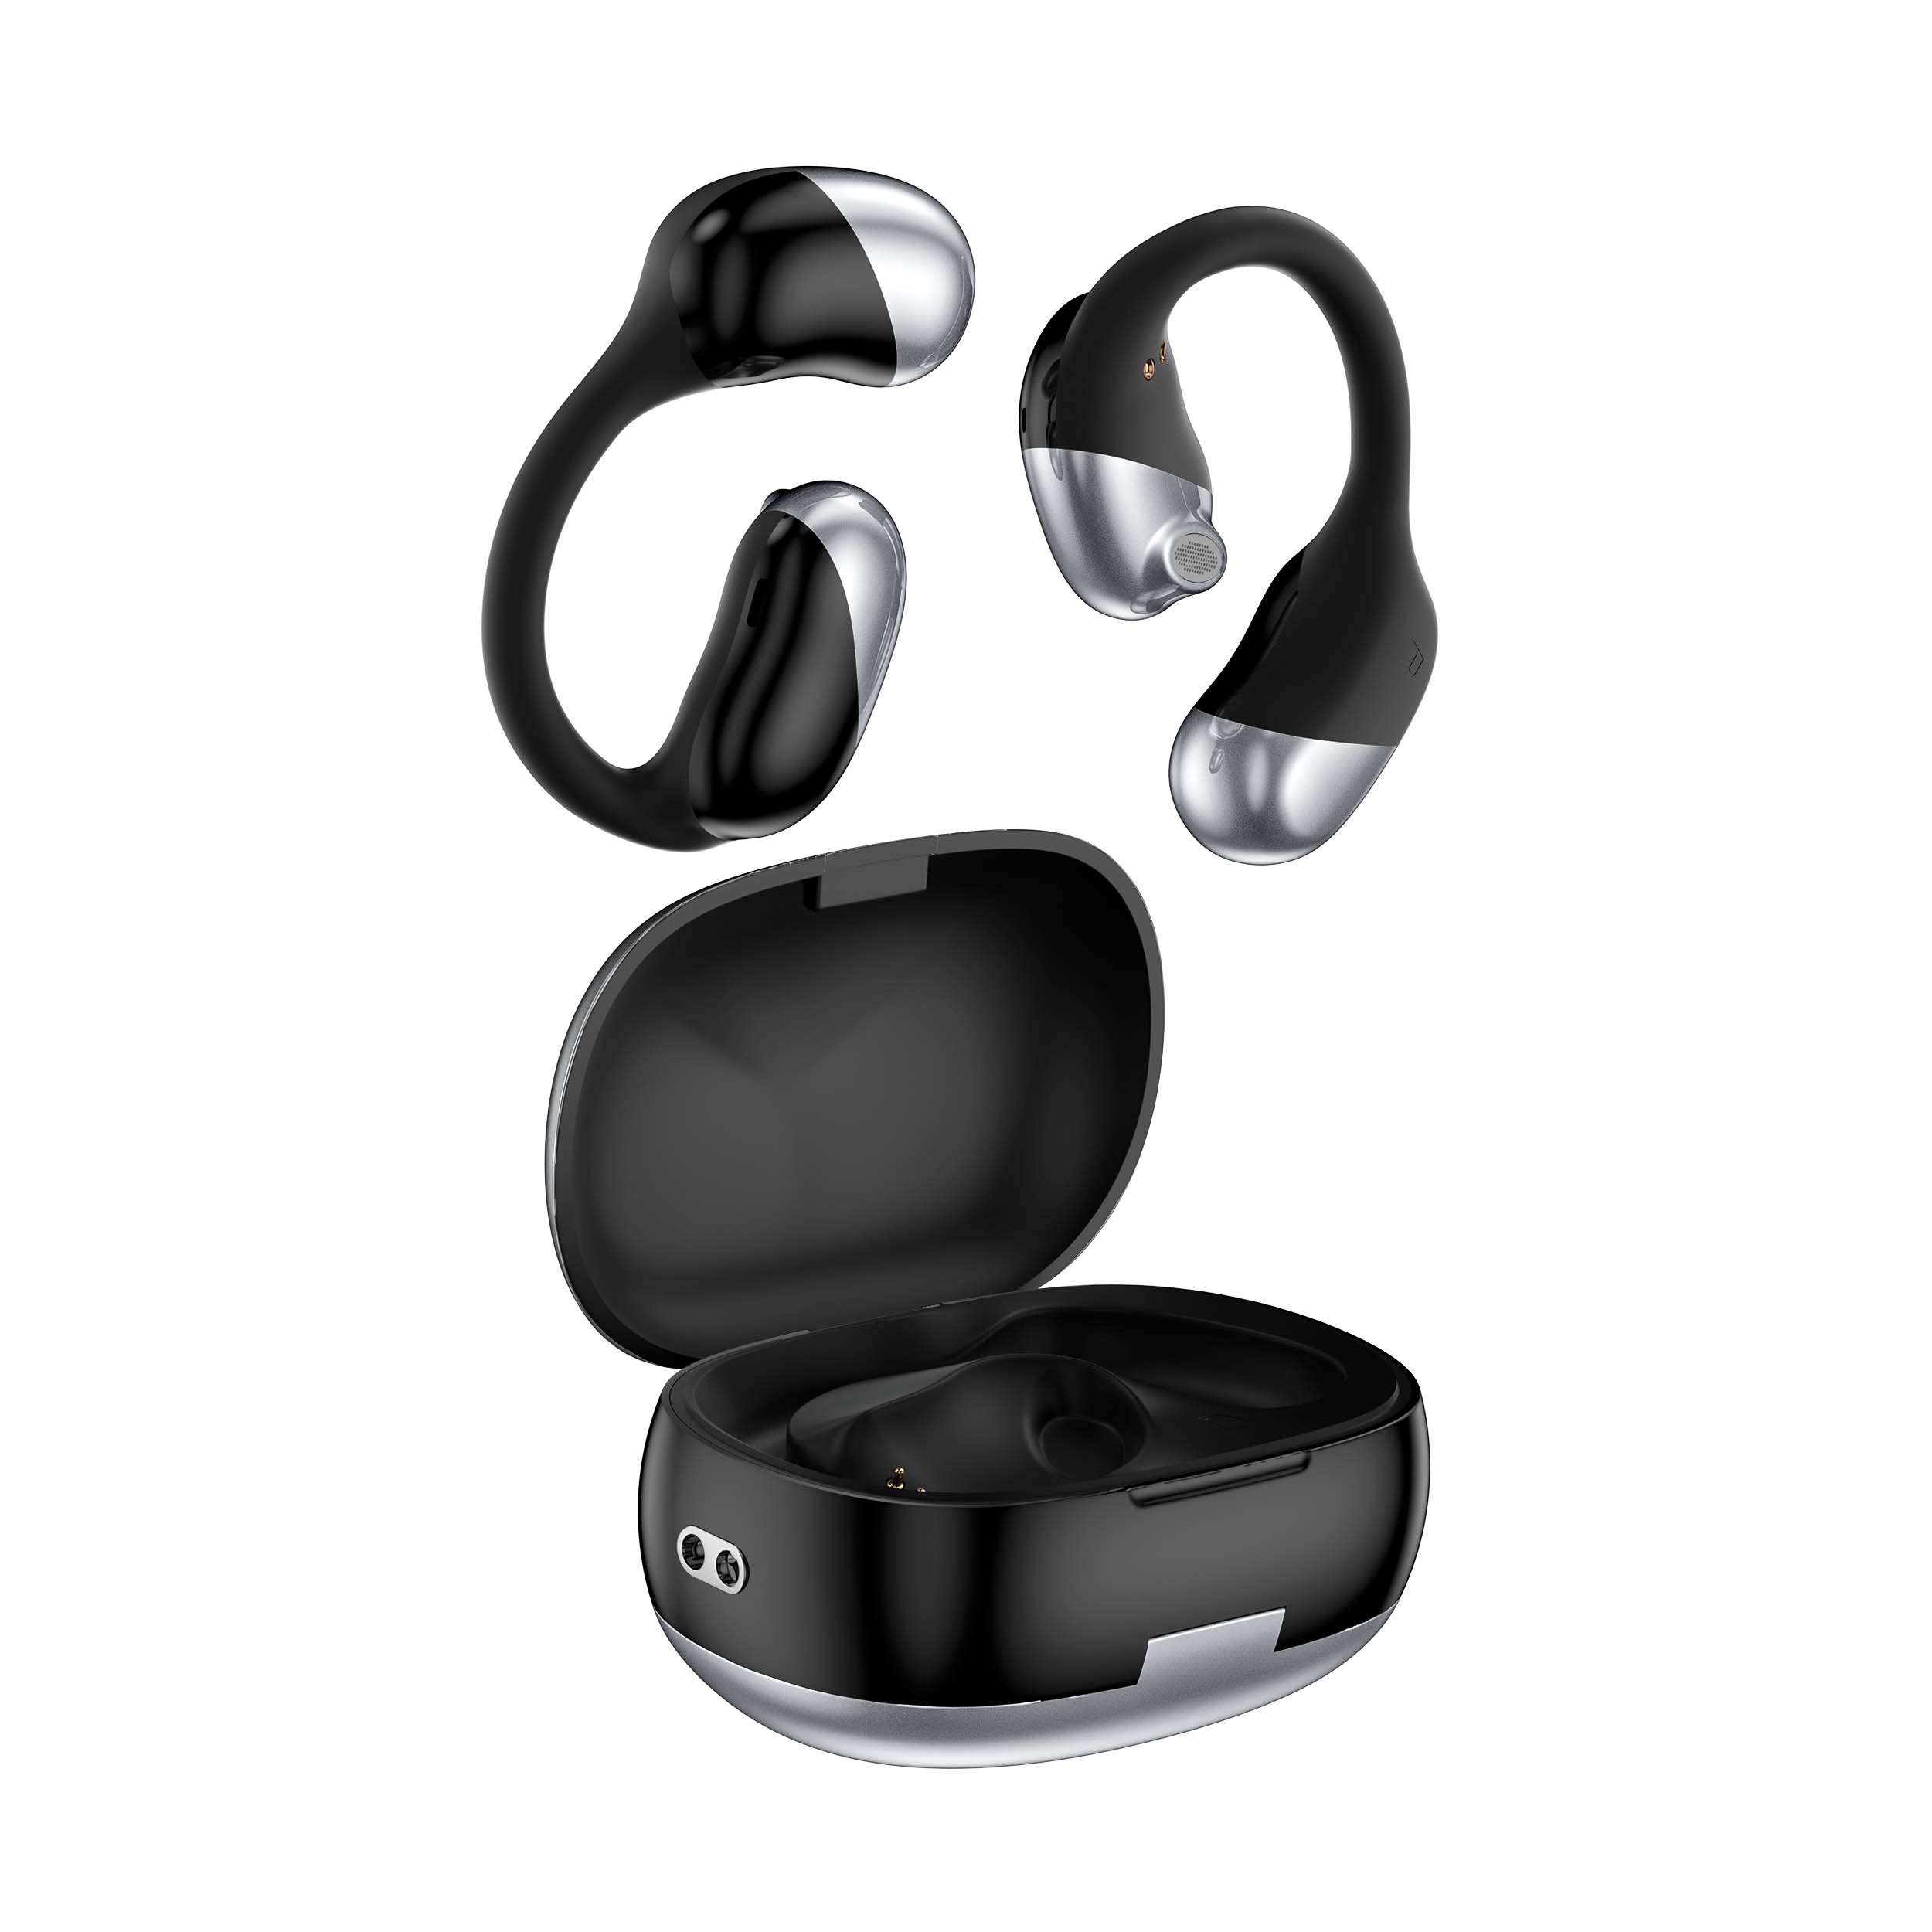 OWS Open running auriculares impermeables auriculares inalámbricos deporte hd estéreo